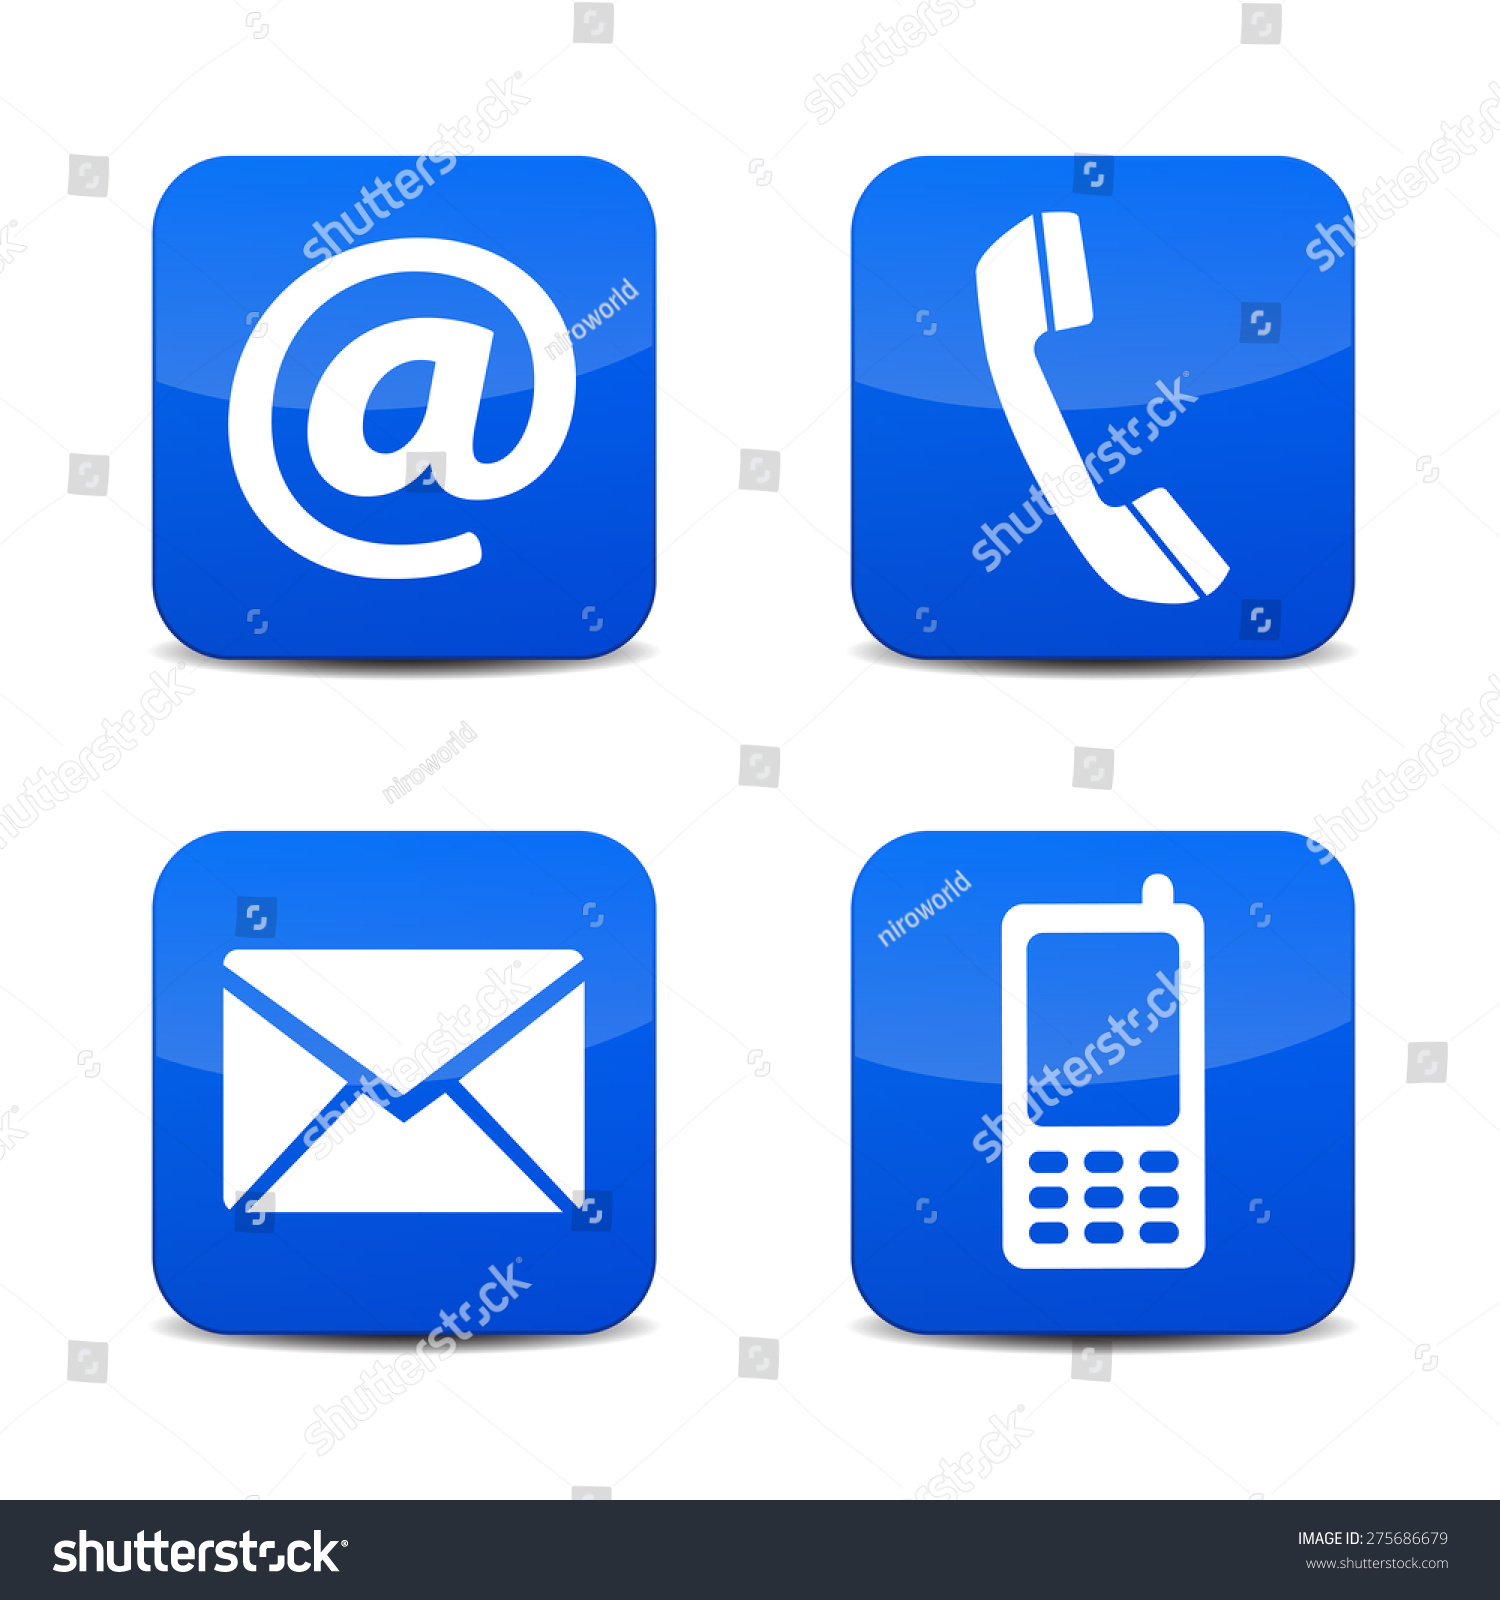 phone email clipart - photo #50